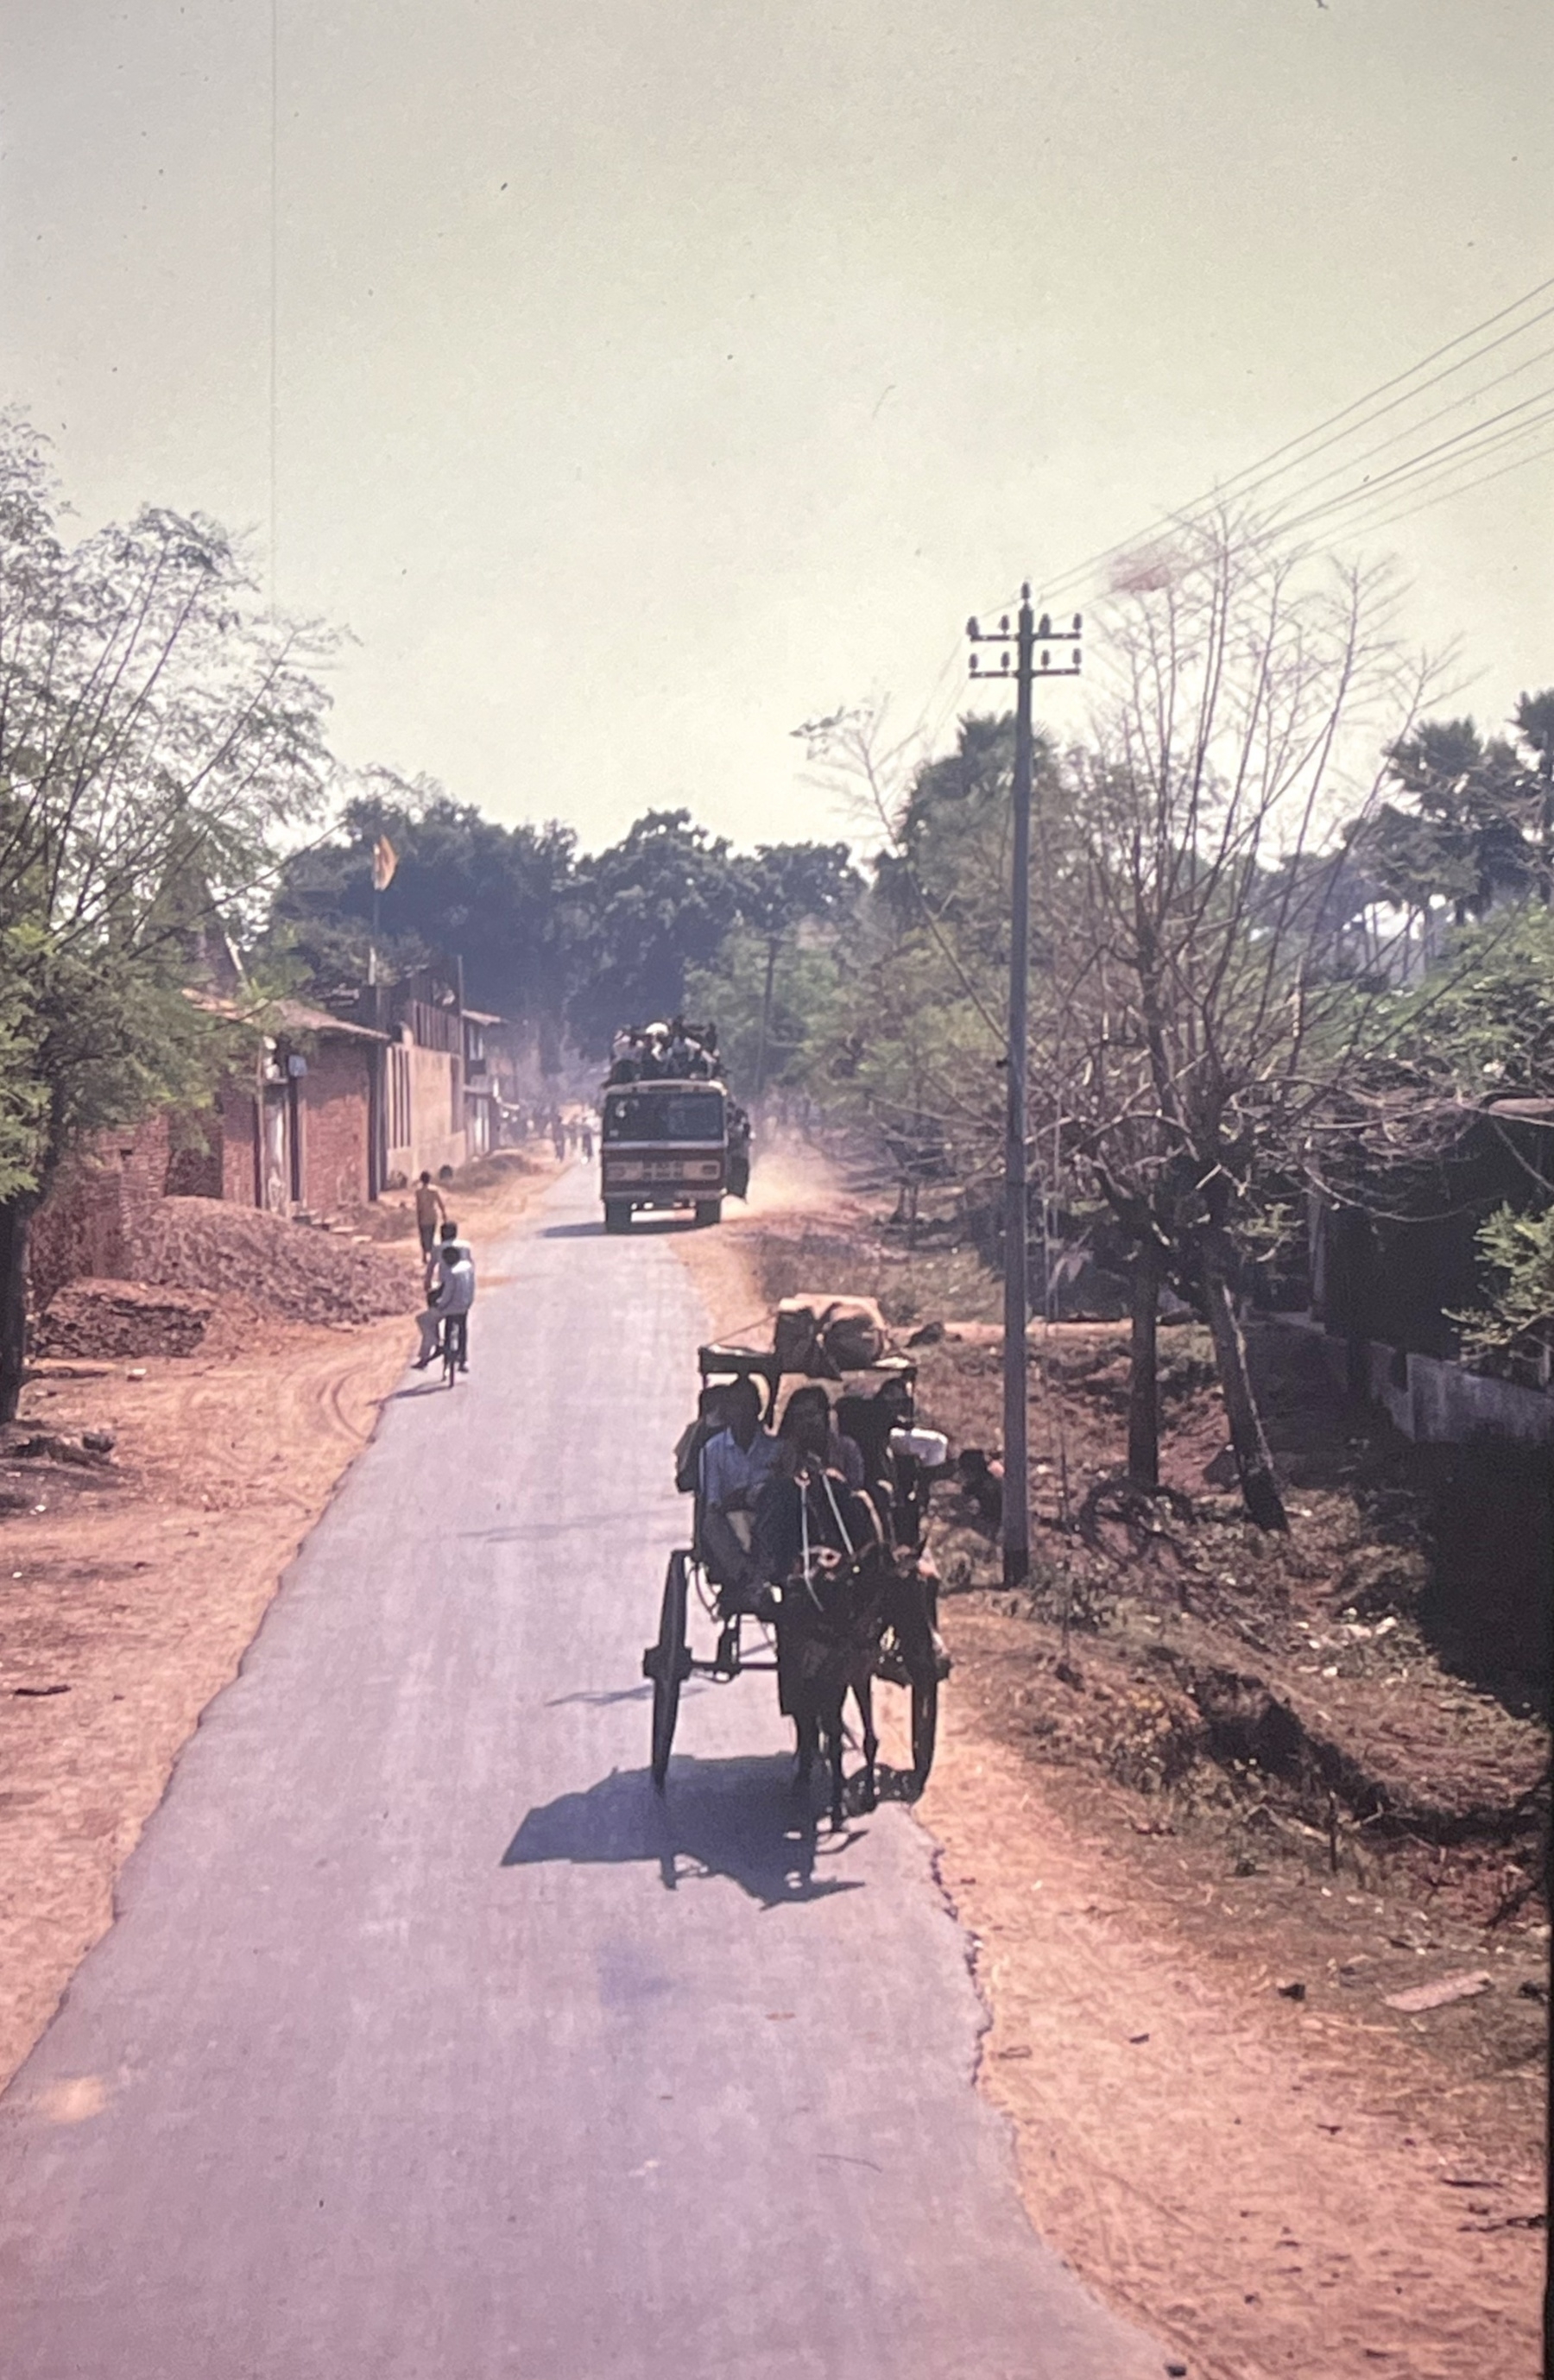 Horse and cart and bus on road near to Bodhgaya, Bihar state, India